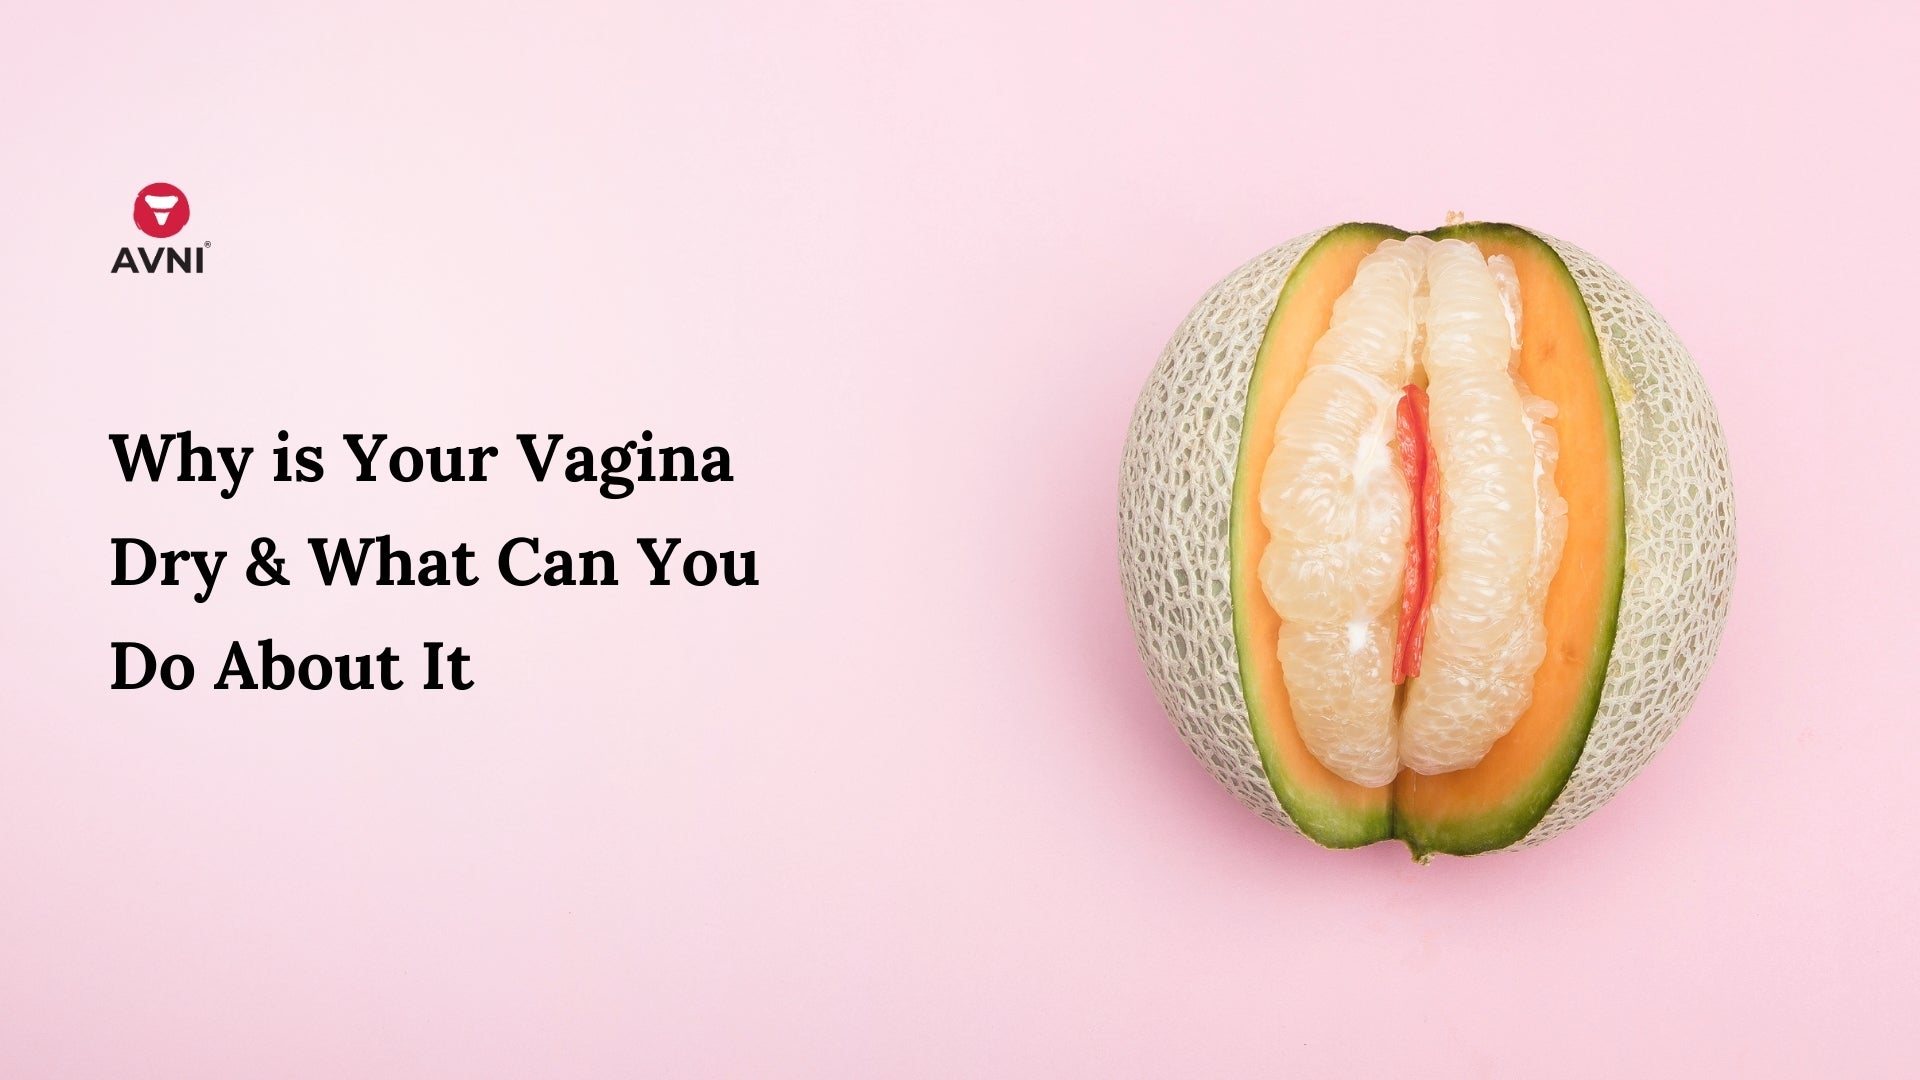 Why is Your Vagina Dry & What Can You Do About It